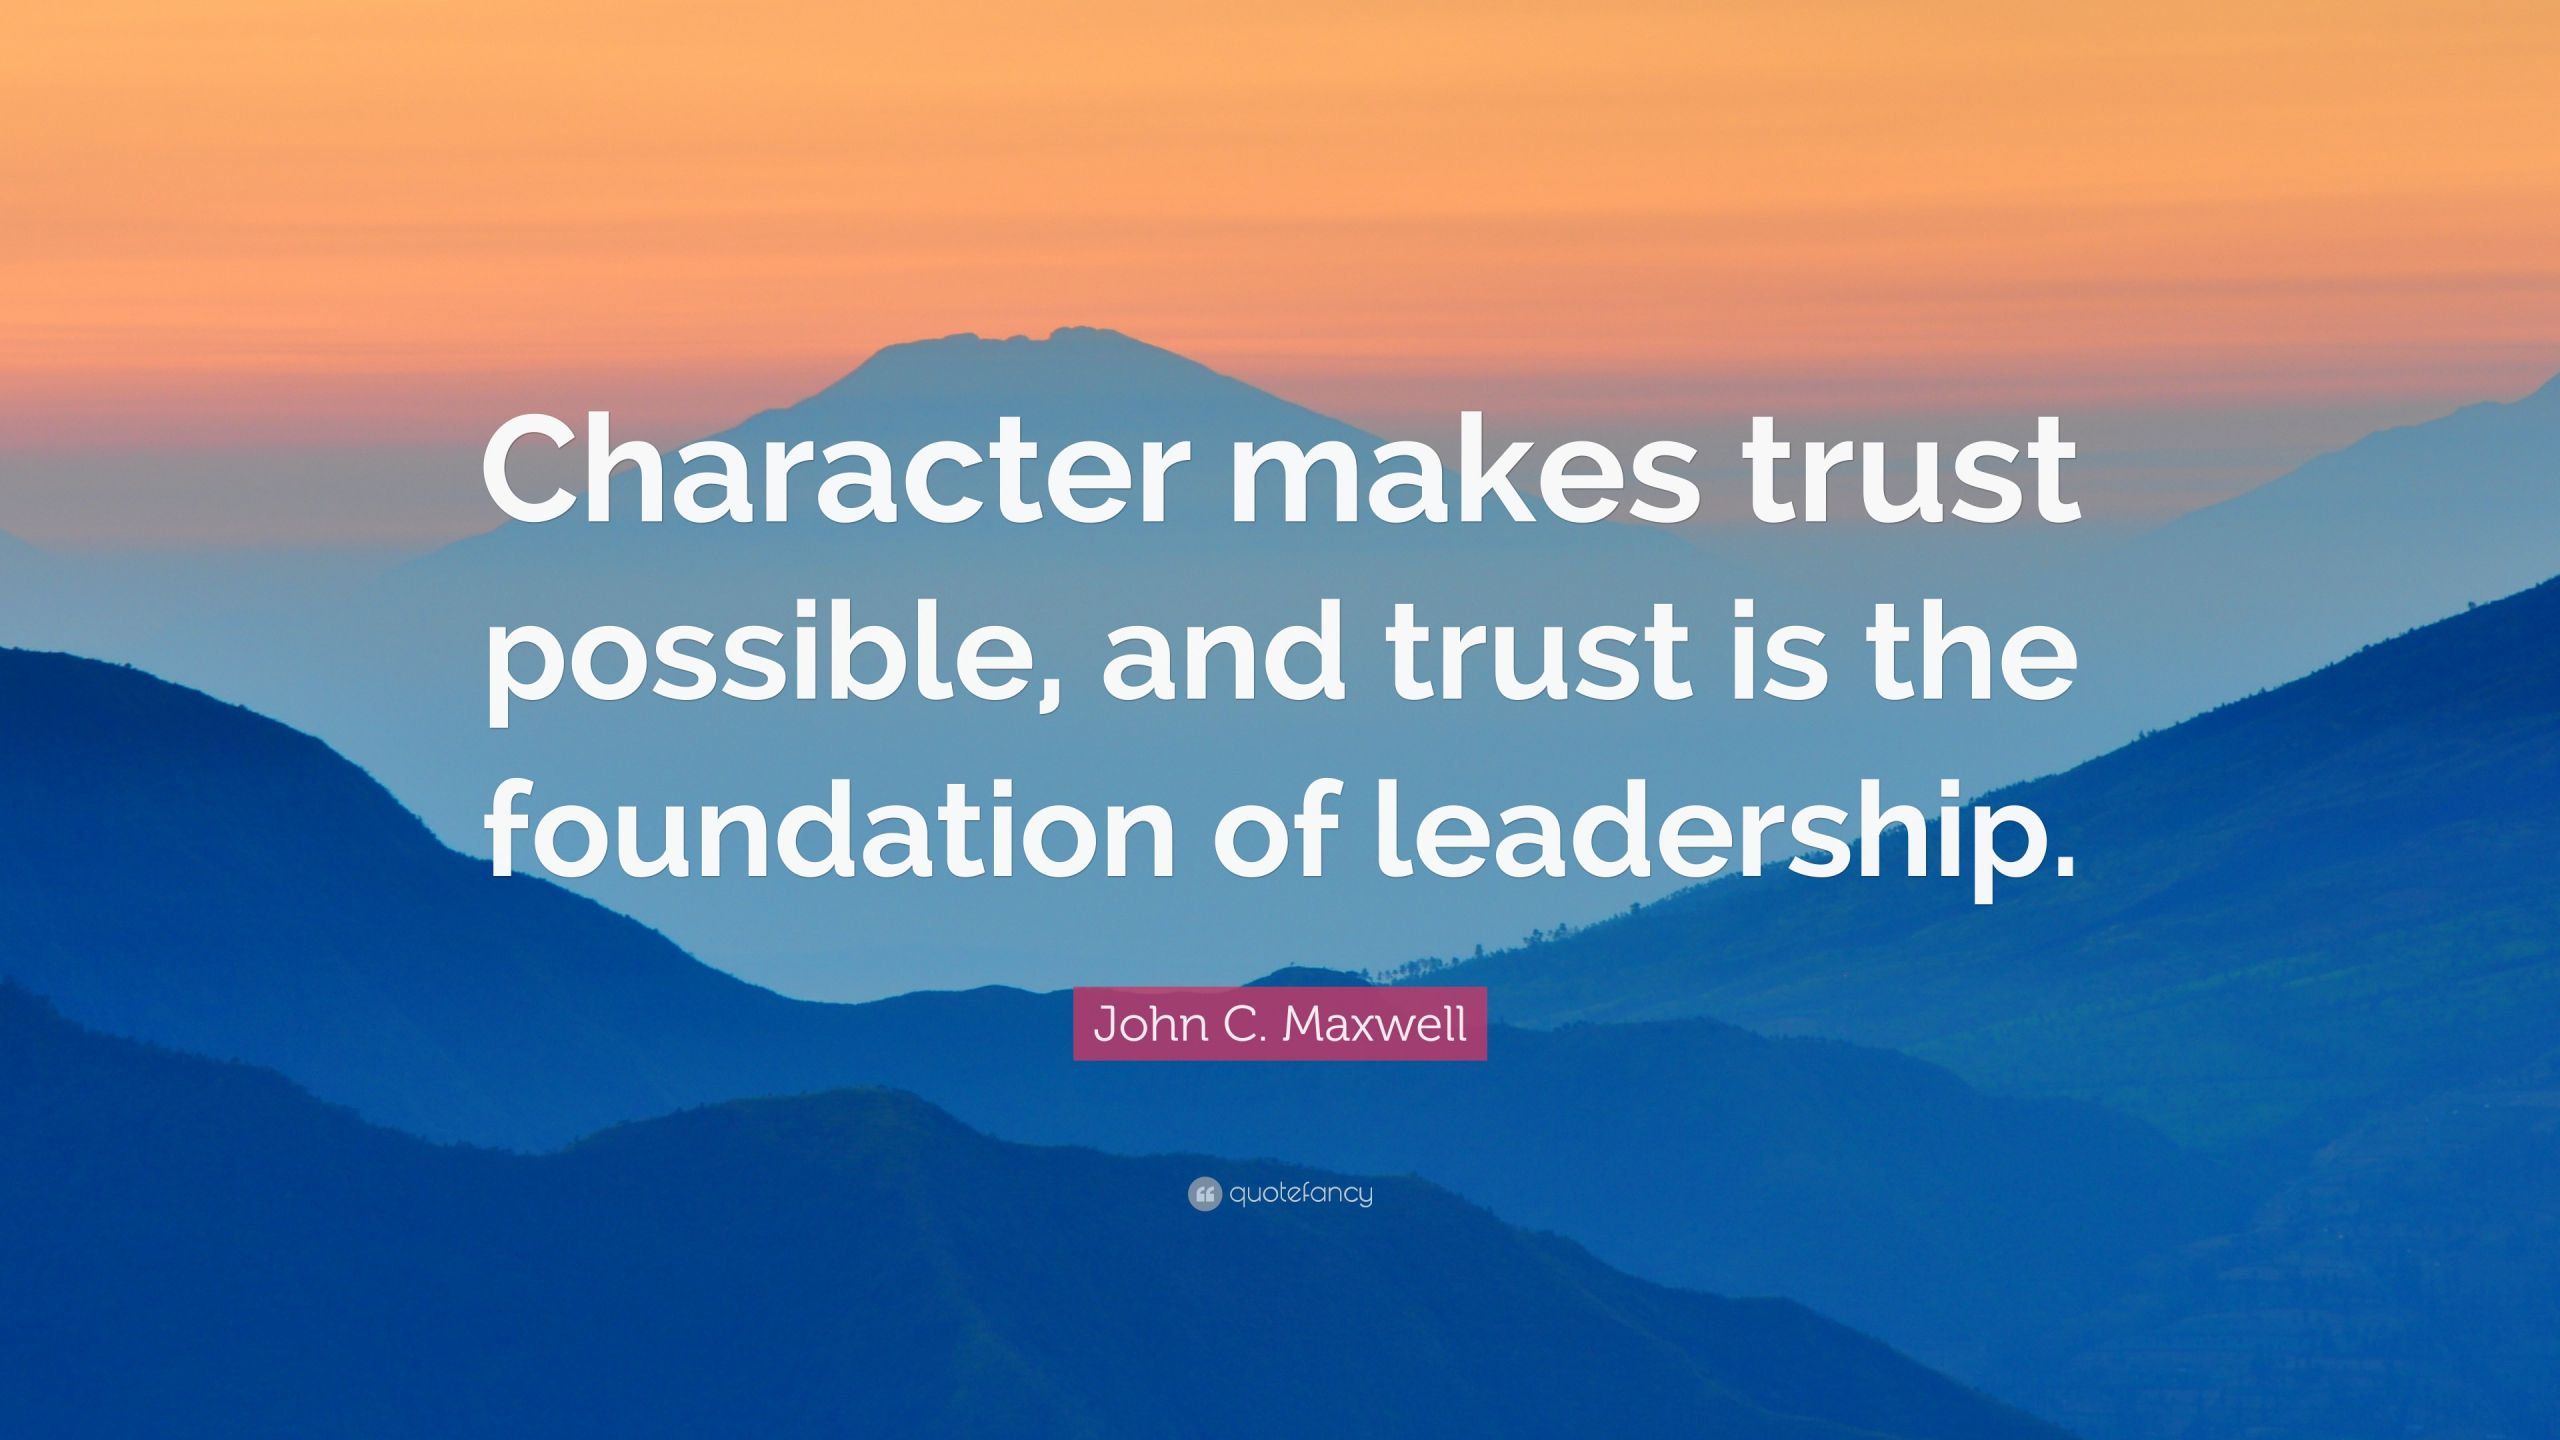 Quotes About Leadership And Character
 John C Maxwell Quote “Character makes trust possible